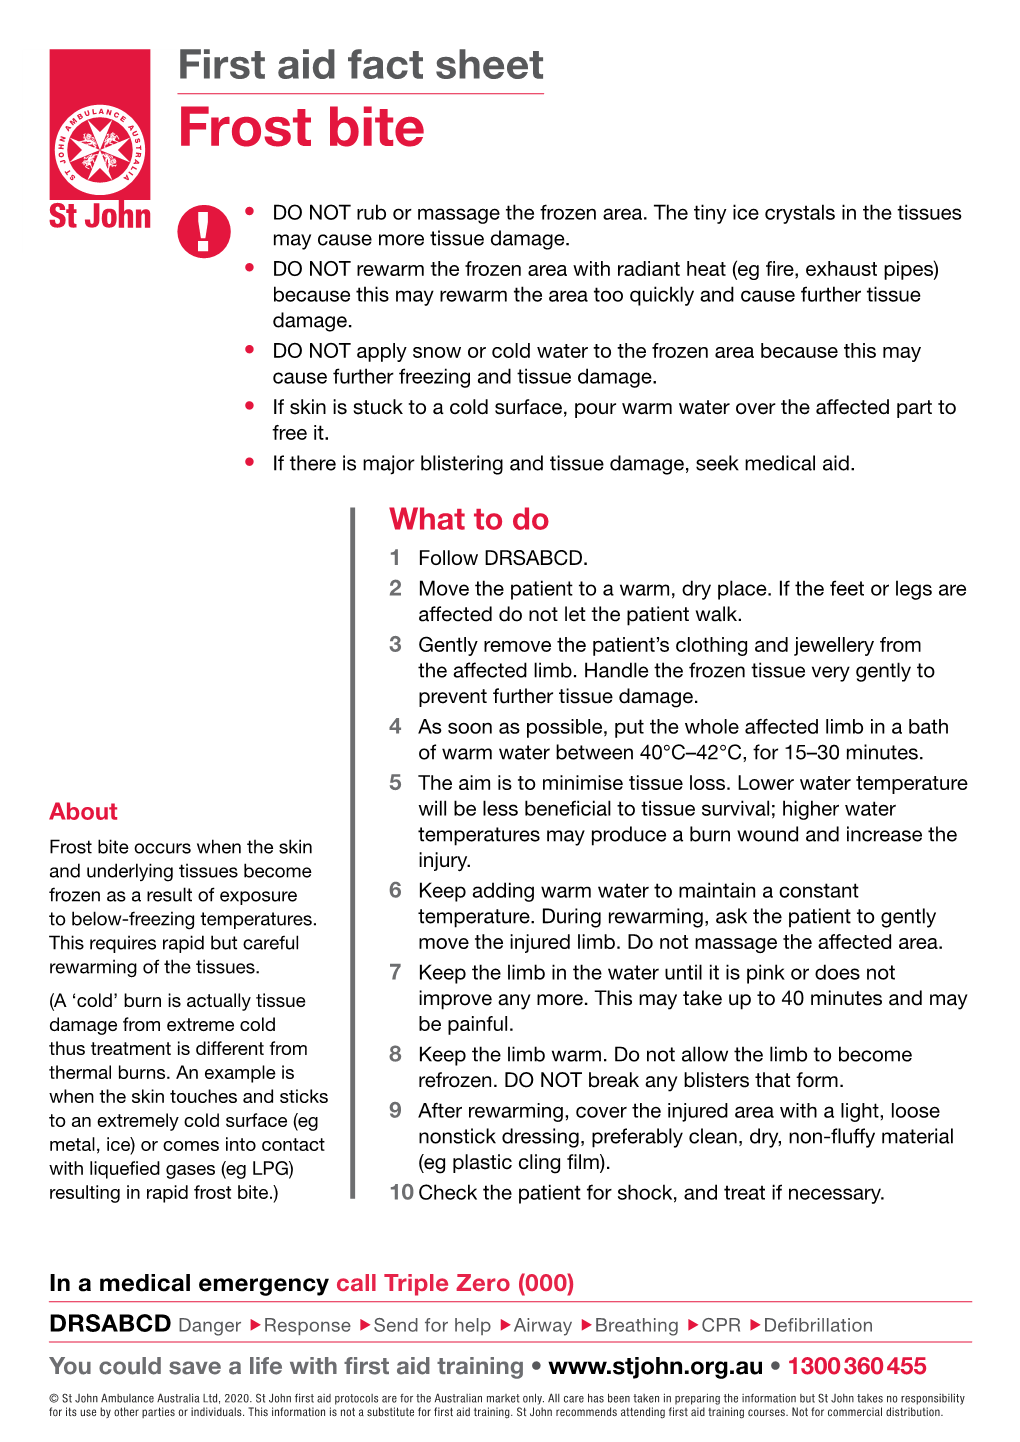 First Aid Fact Sheet Frost Bite